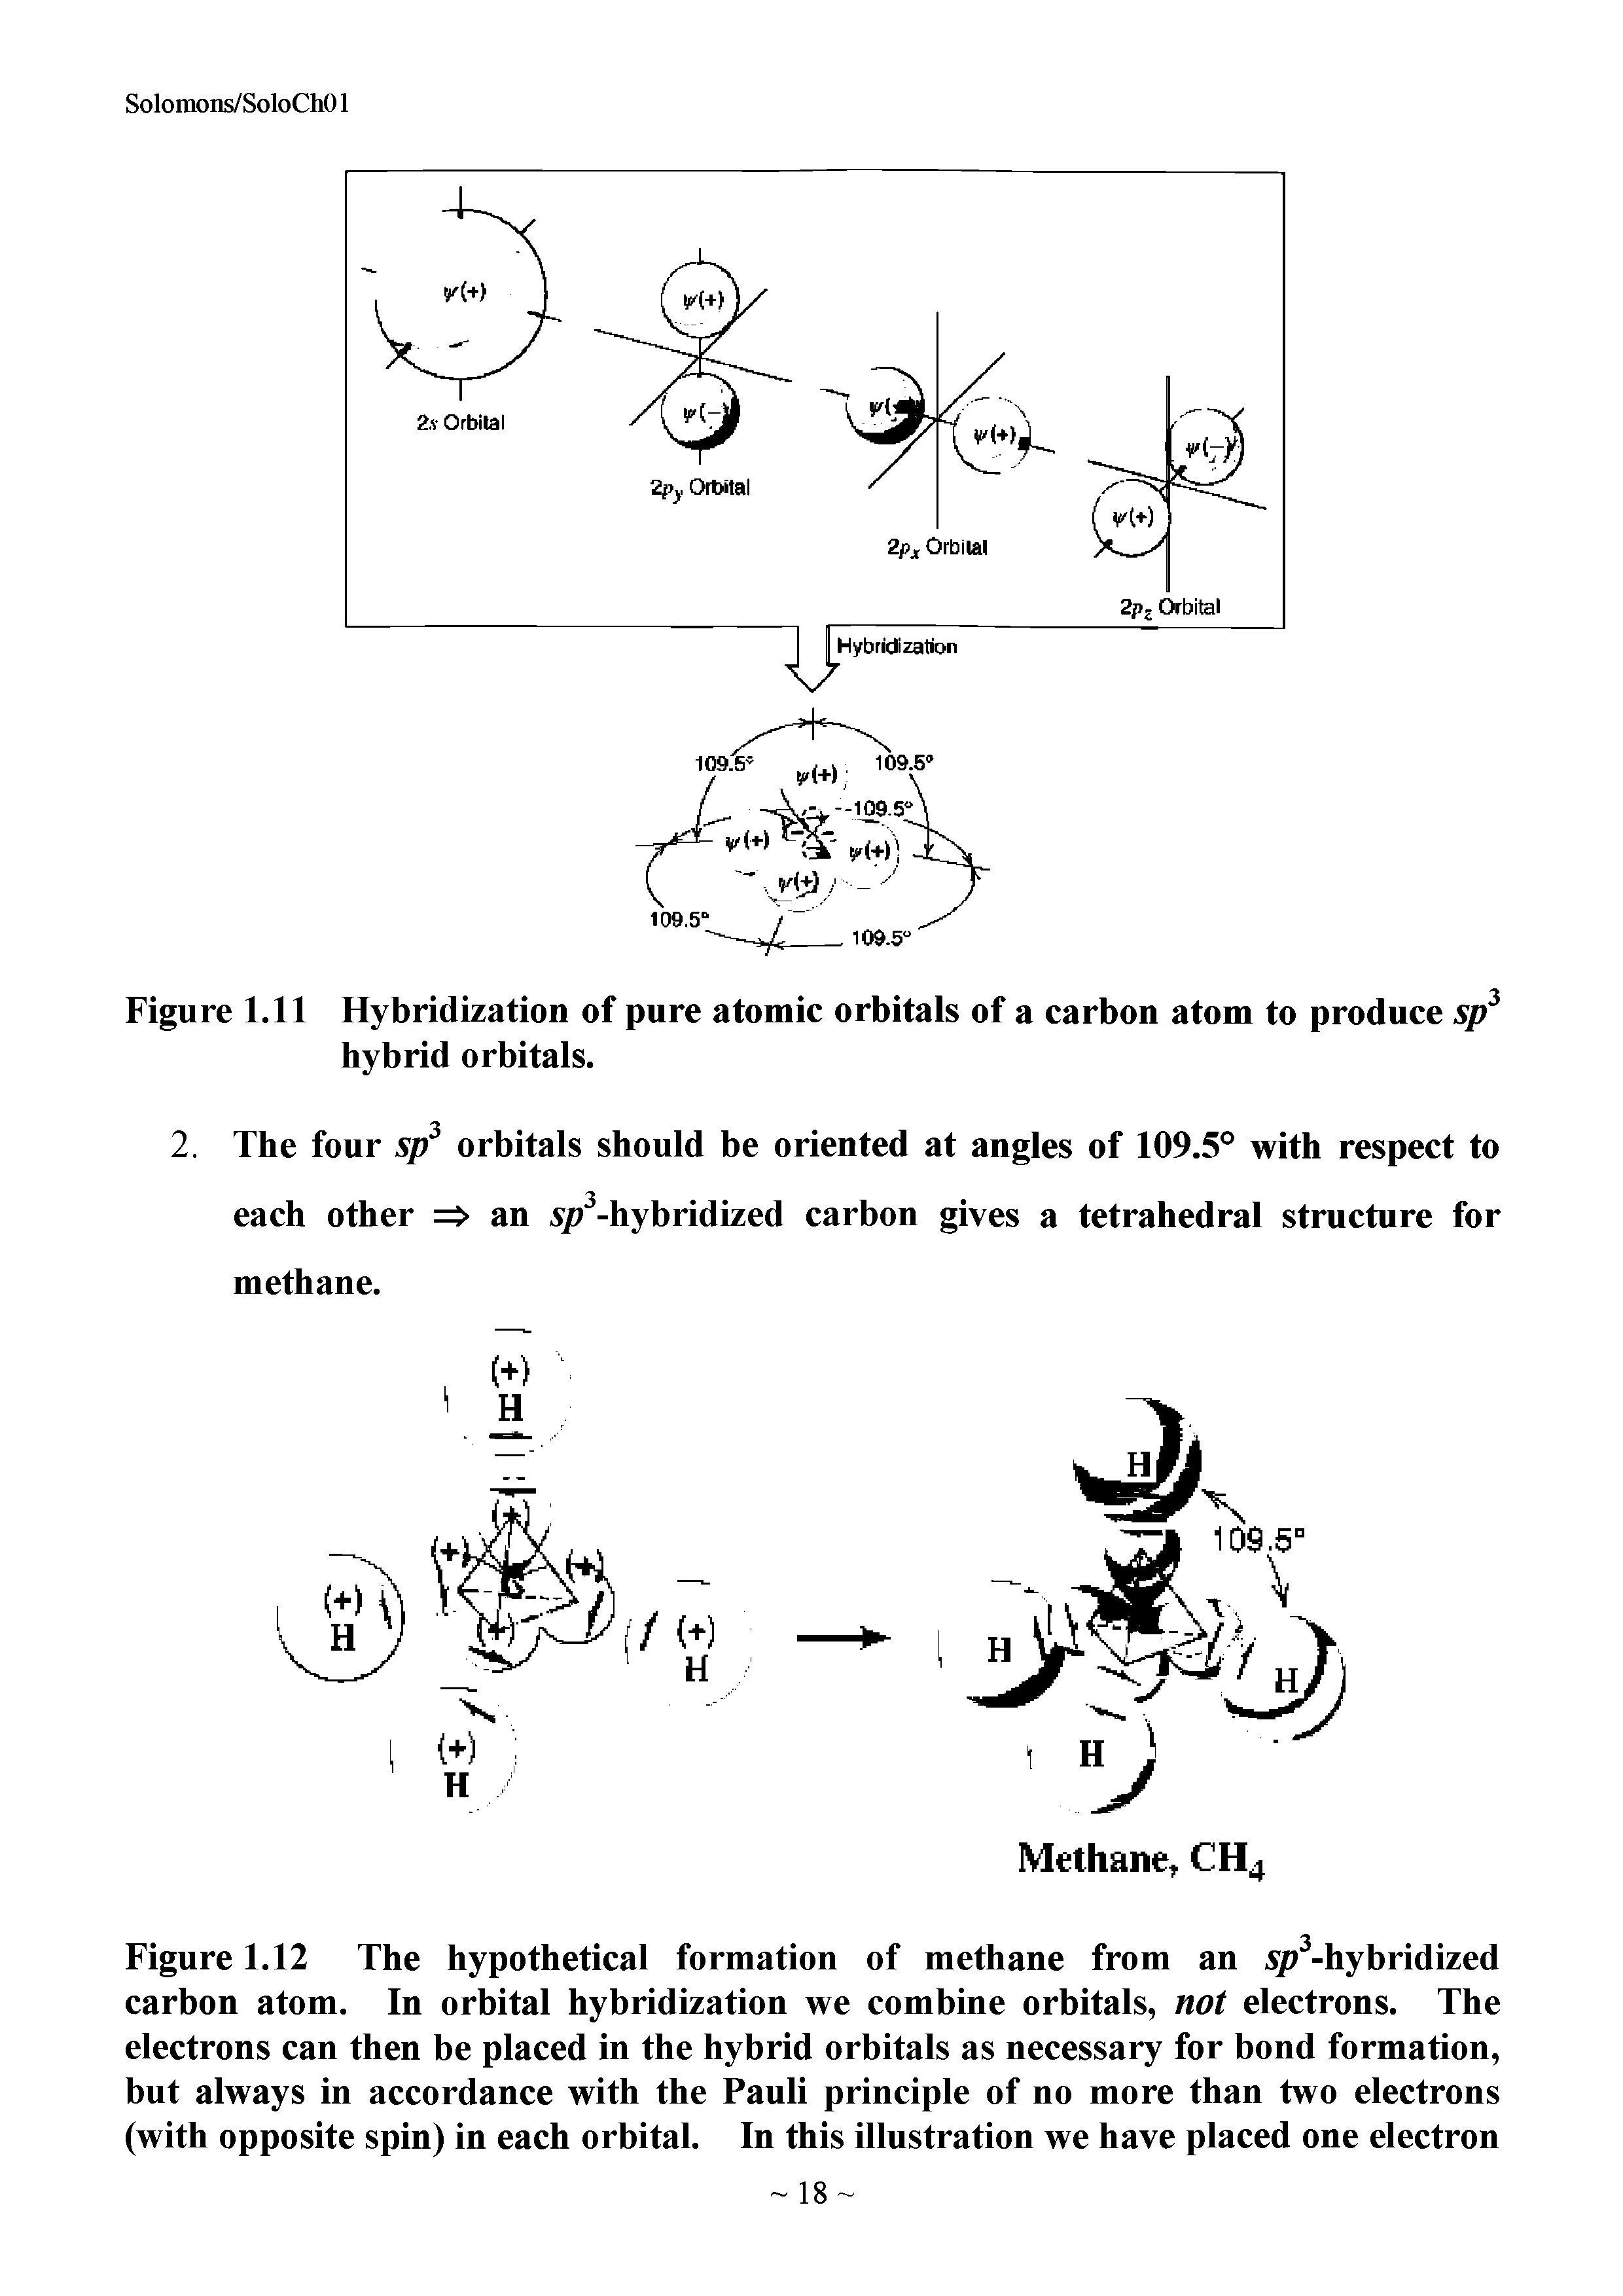 Figure 1.12 The hypothetical formation of methane from an sp -hybridized carbon atom. In orbital hybridization we combine orbitals, not electrons. The electrons can then be placed in the hybrid orbitals as necessary for bond formation, but always in accordance with the Pauli principle of no more than two electrons (with opposite spin) in each orbital. In this illustration we have placed one electron...